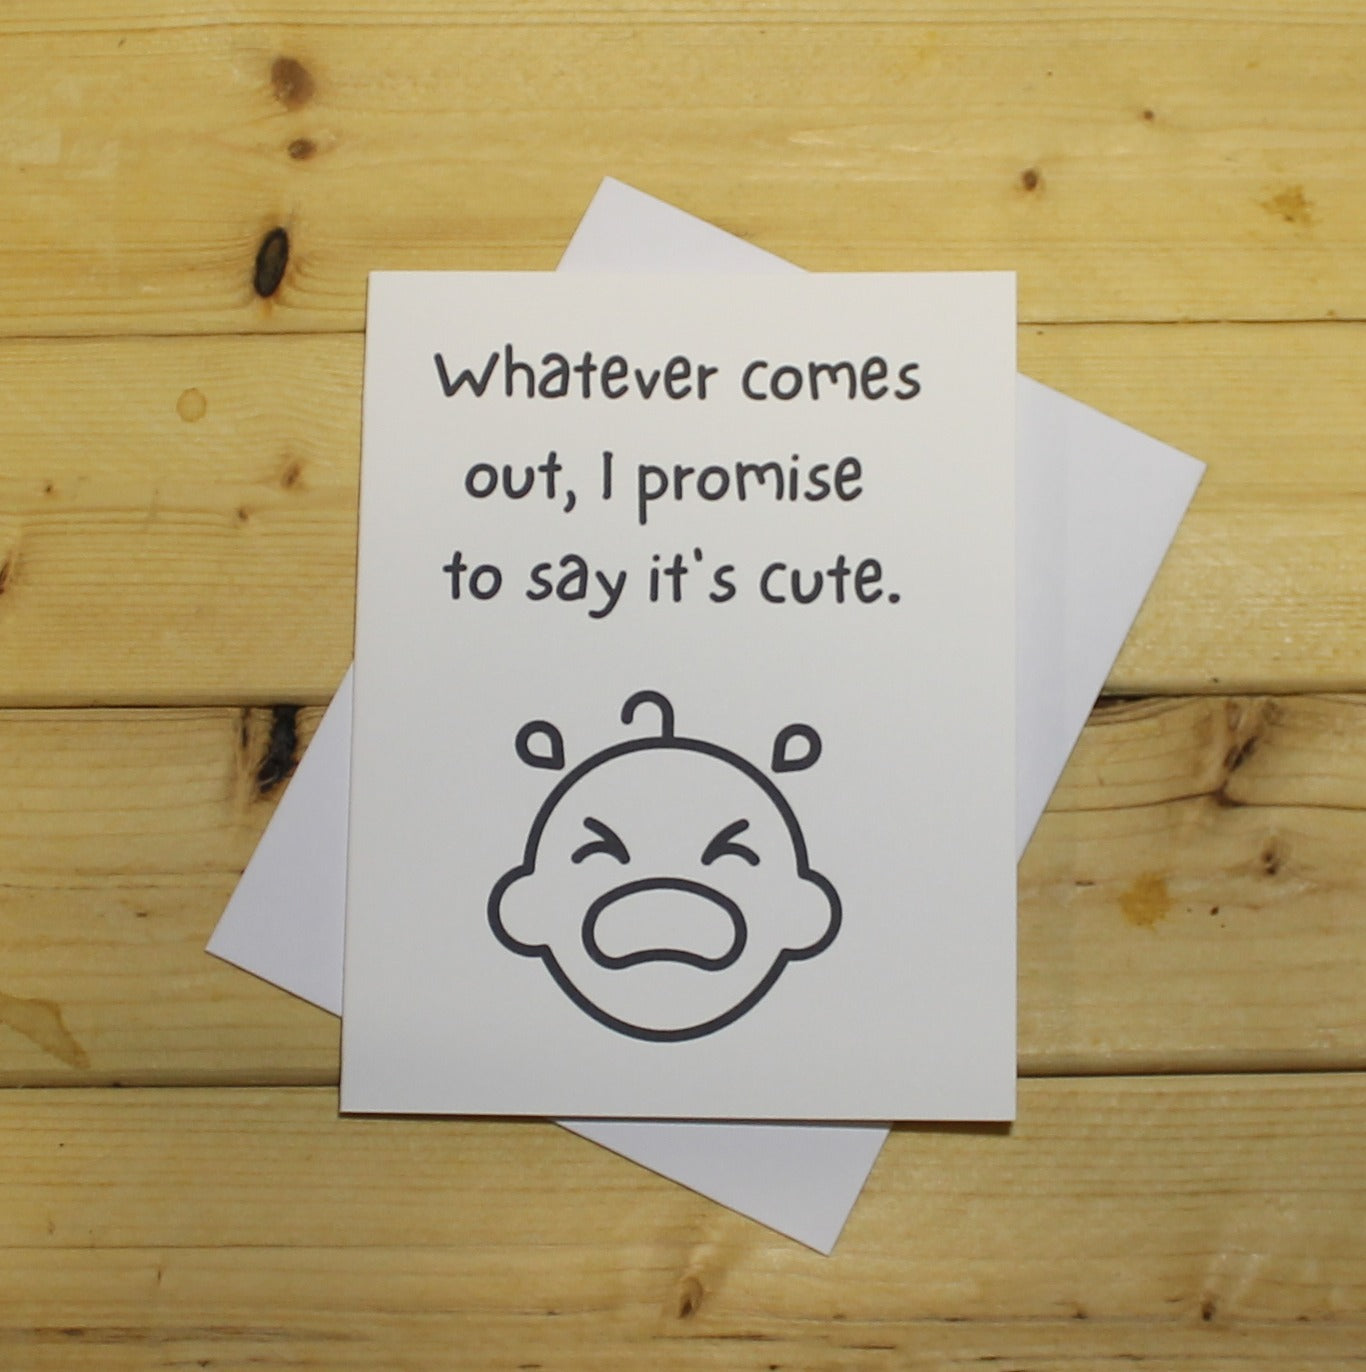 Funny Baby Card: "Whatever comes out, I promise to say it's cute."